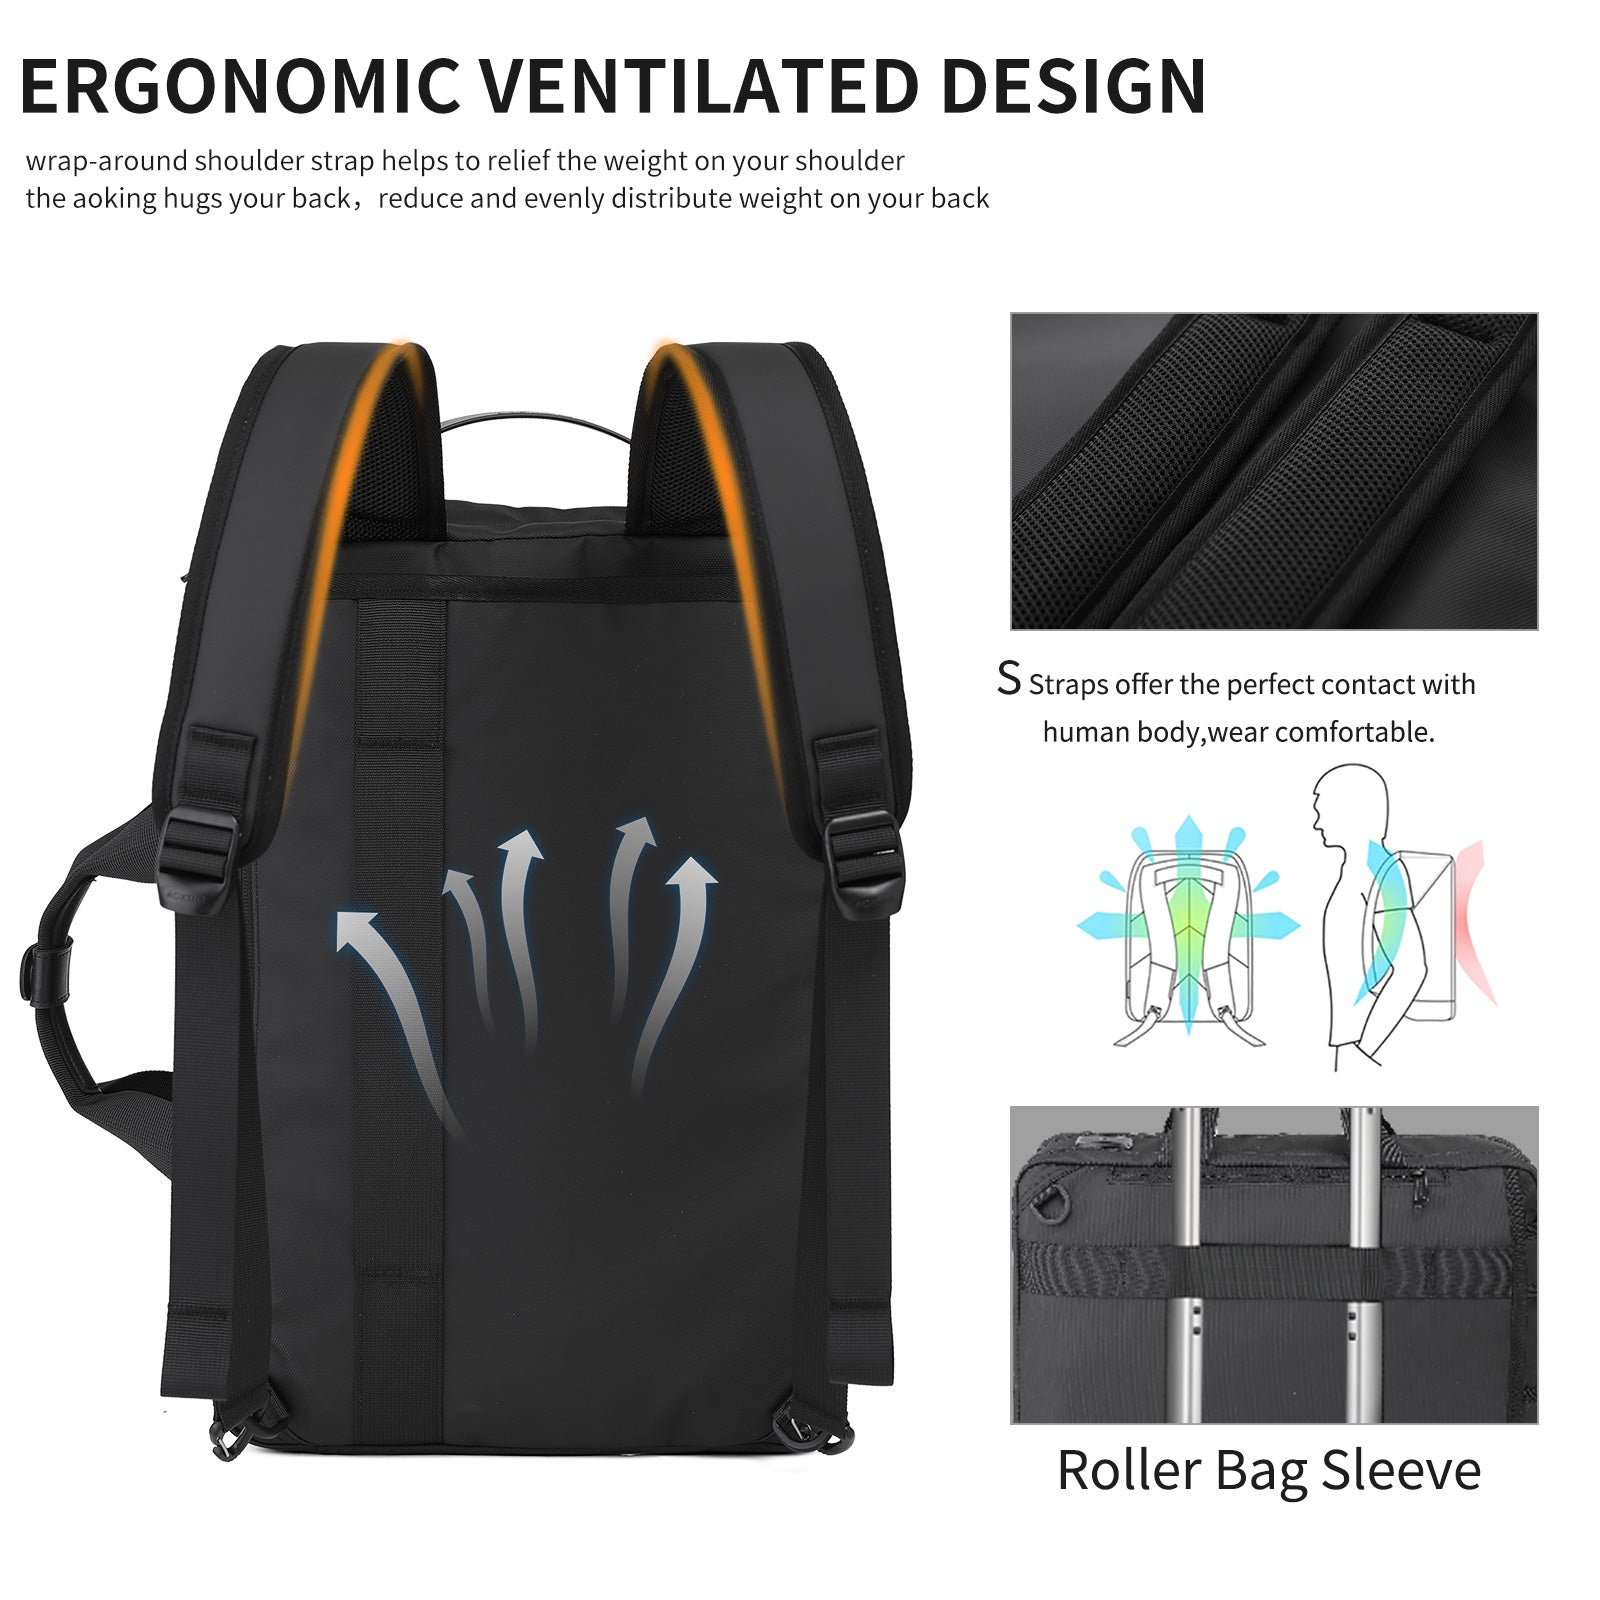 15.6''Laptop Business Backpack SN4002